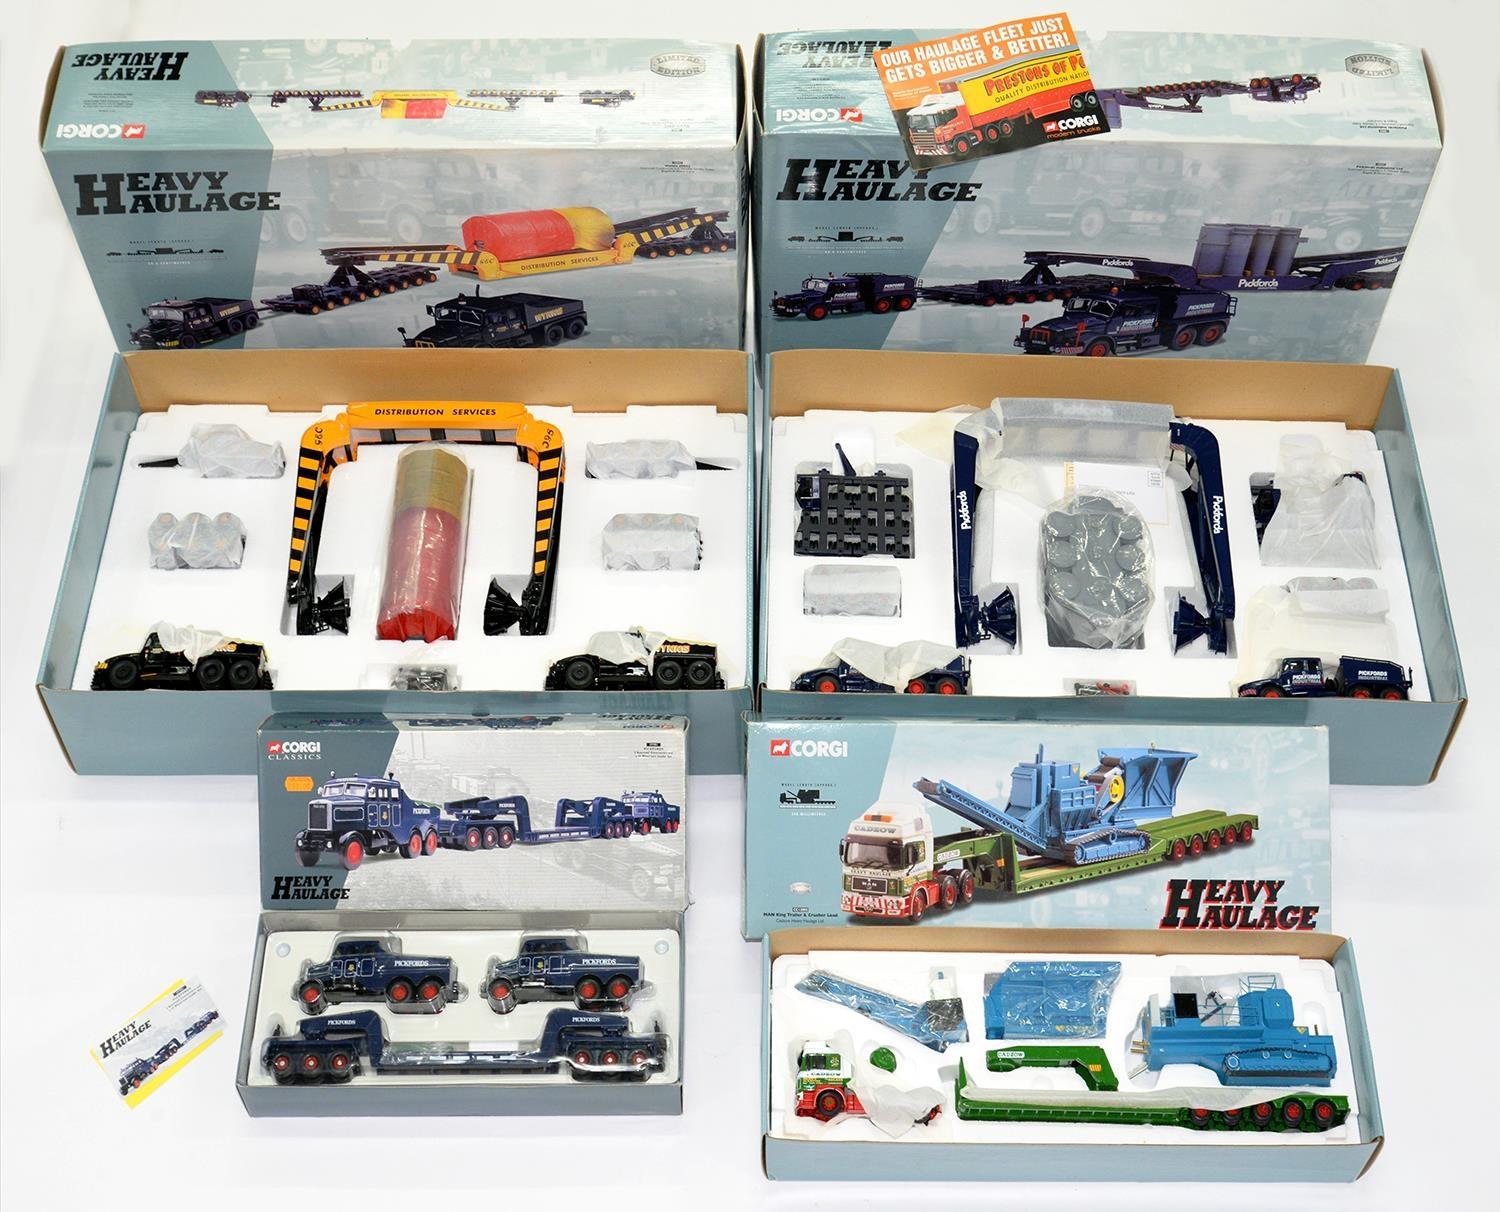 FOUR CORGI TOYS, ALL BOXED LARGE SCALE HEAVY HAULAGE MODELS, COMPRISING PICKFORDS, MAN KING